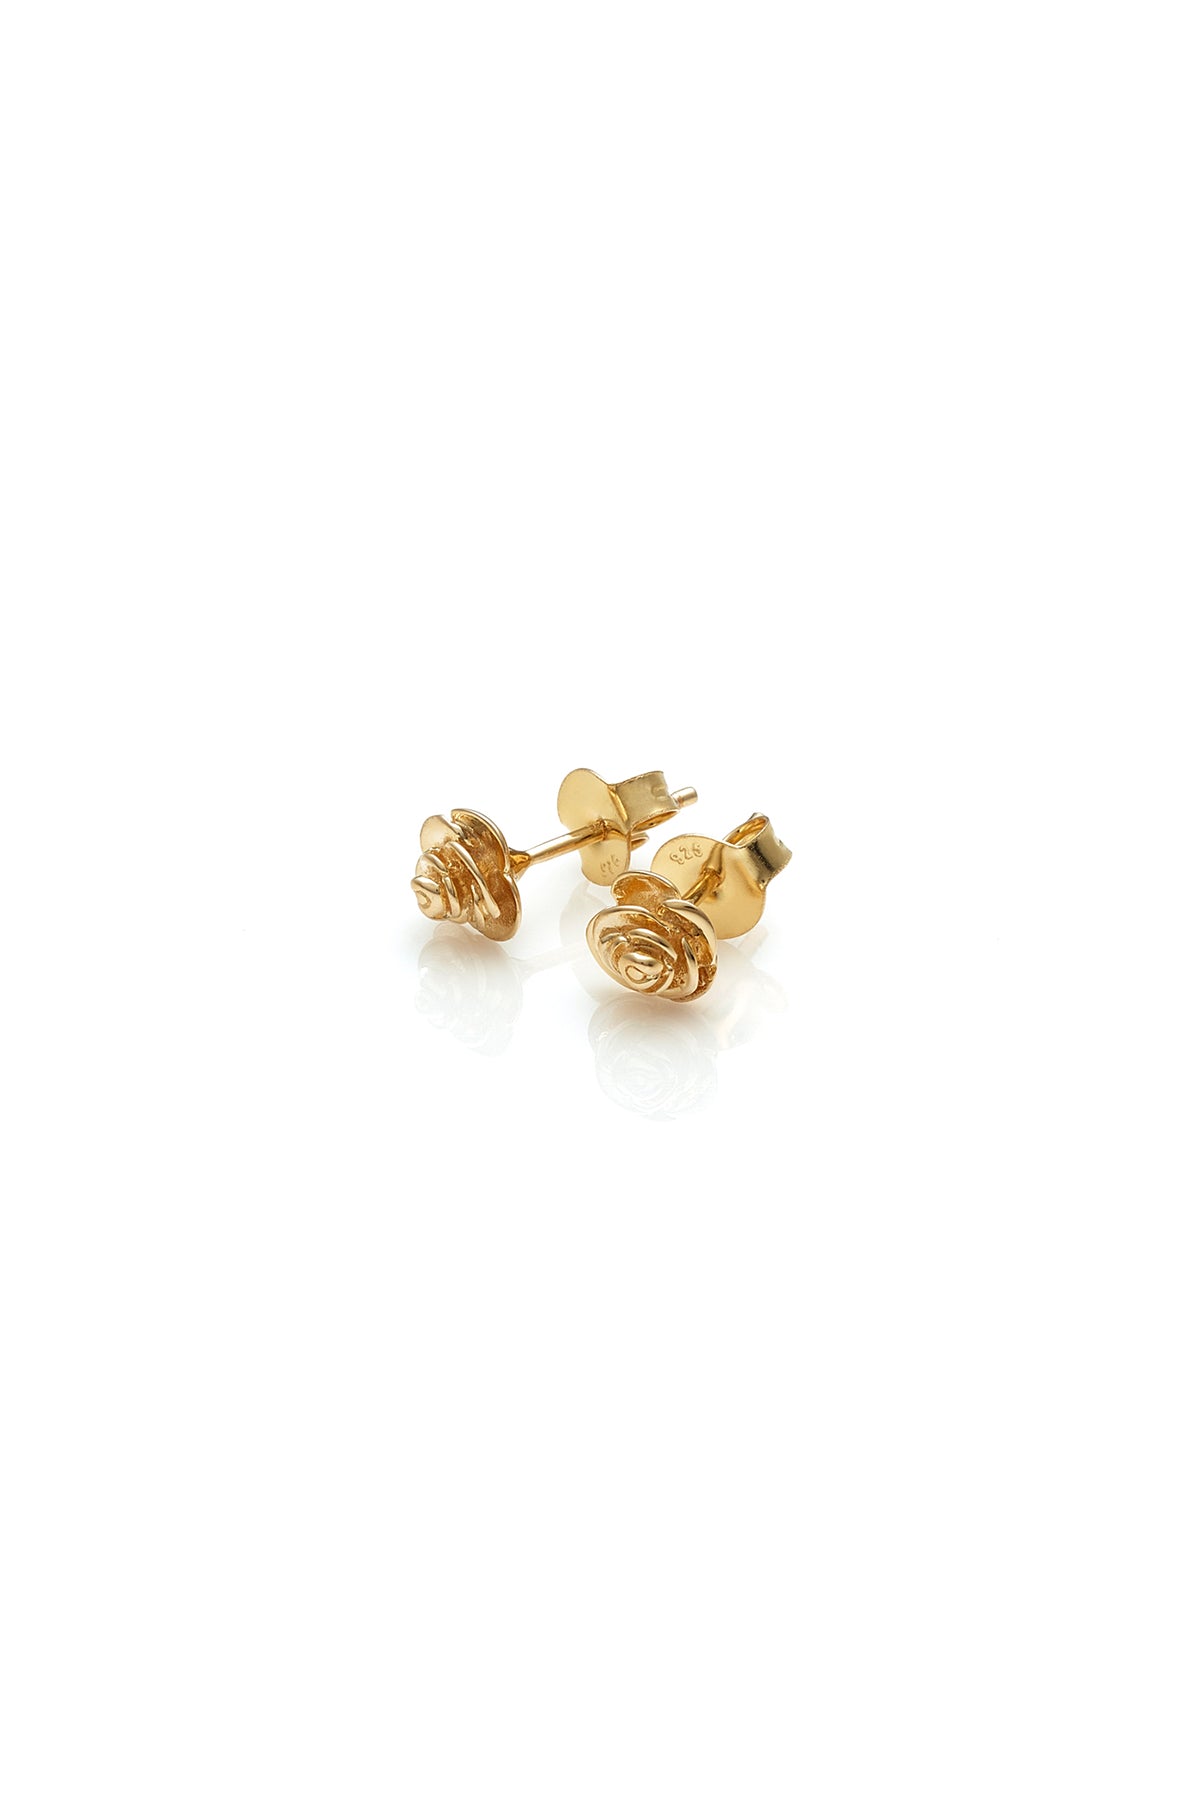 The Stolen Girlfriends Club Bow Earrings are cute mini rose buds, these little roses are great for every day wear. Crafted using 18k gold plating, pair with other studs, match with Stolen's sleeper version of this stud or wear alone.      Sold as a pair     High polish sterling silver     Available in; 18k Gold plating     Comes in a 'Stolen Girlfriends Club' jewellery box